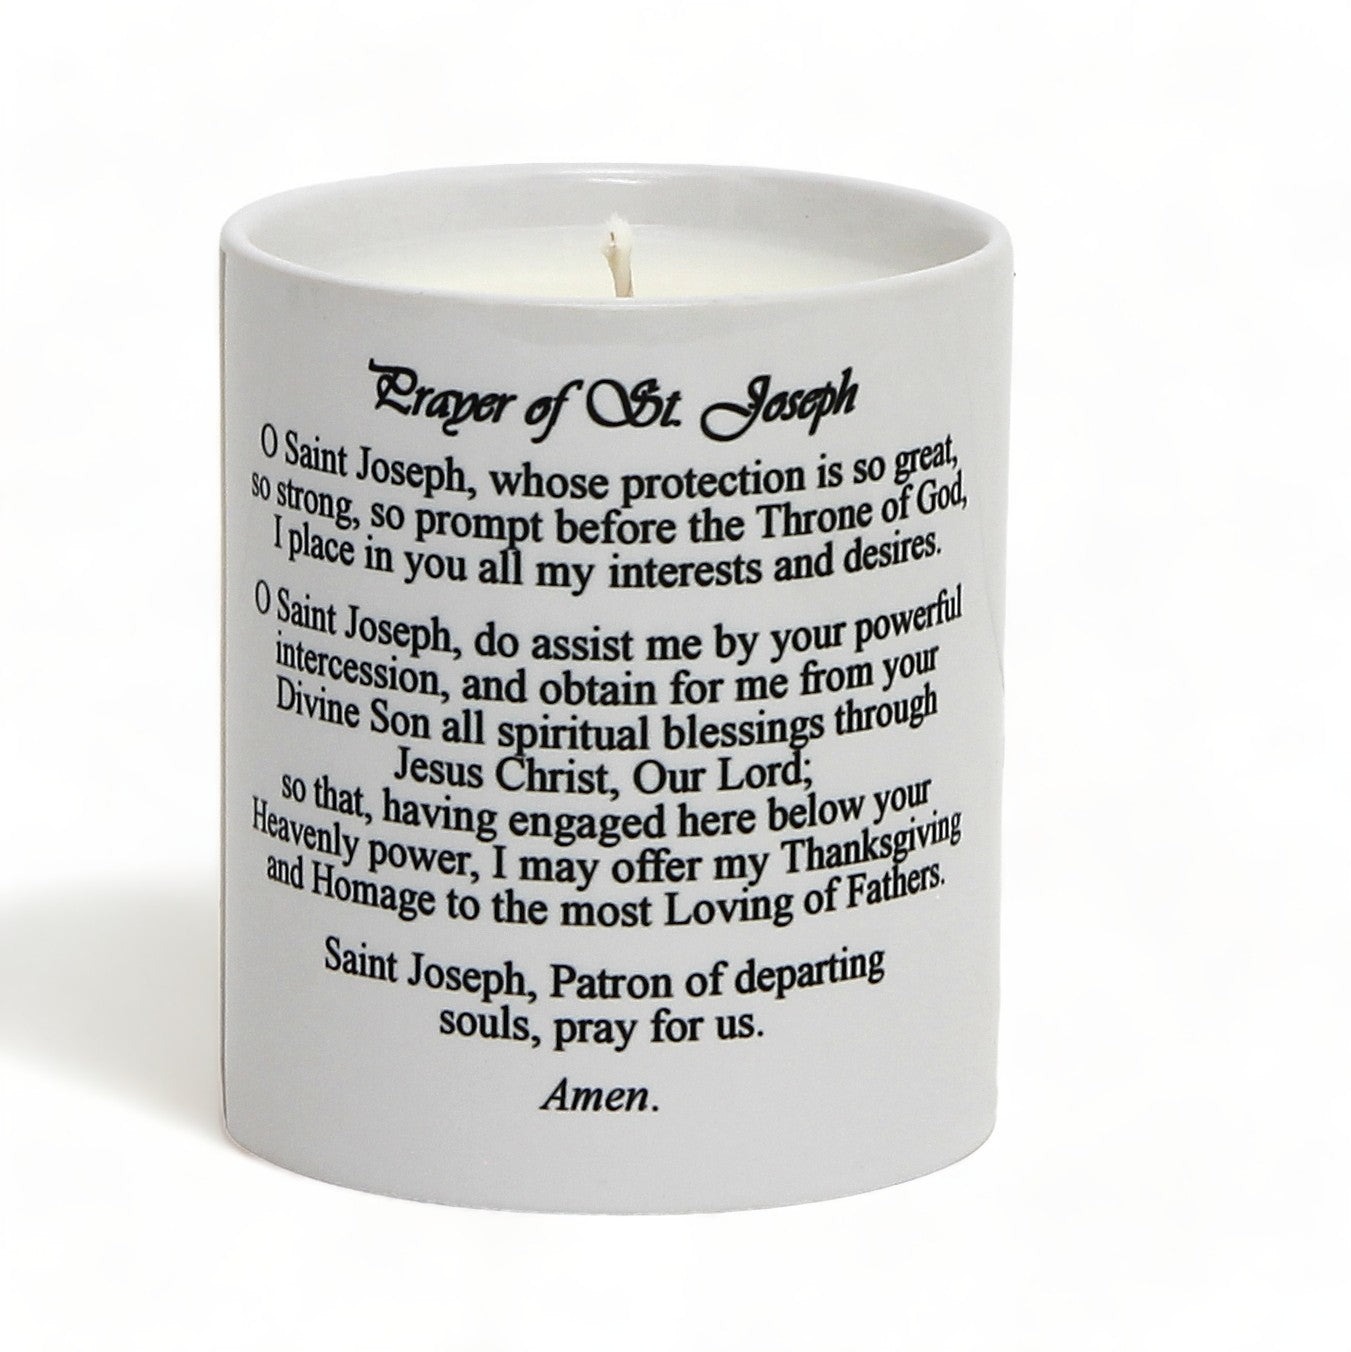 SUBLIMART: Prayer Candle - Porcelain Soy Wax Candle - The Ascension